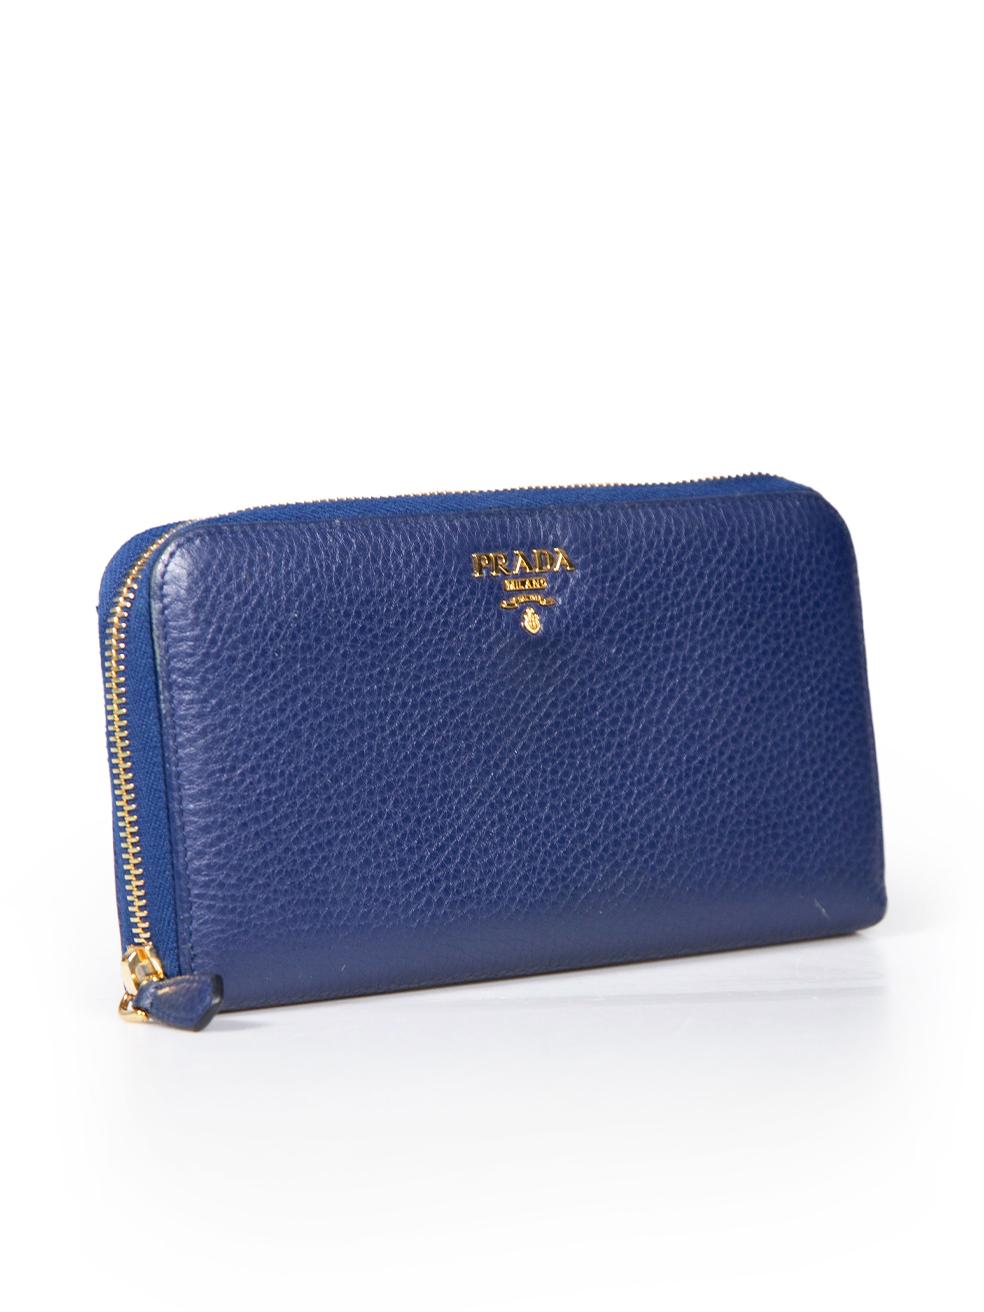 CONDITION is Very good. Minimal wear to wallet is evident. Minimal abrasion and scratches to the leather and discolouration on the zipped compartment lining on this used Prada designer resale item. Comes with original box.
 
 
 
 Details
 
 
 Blue
